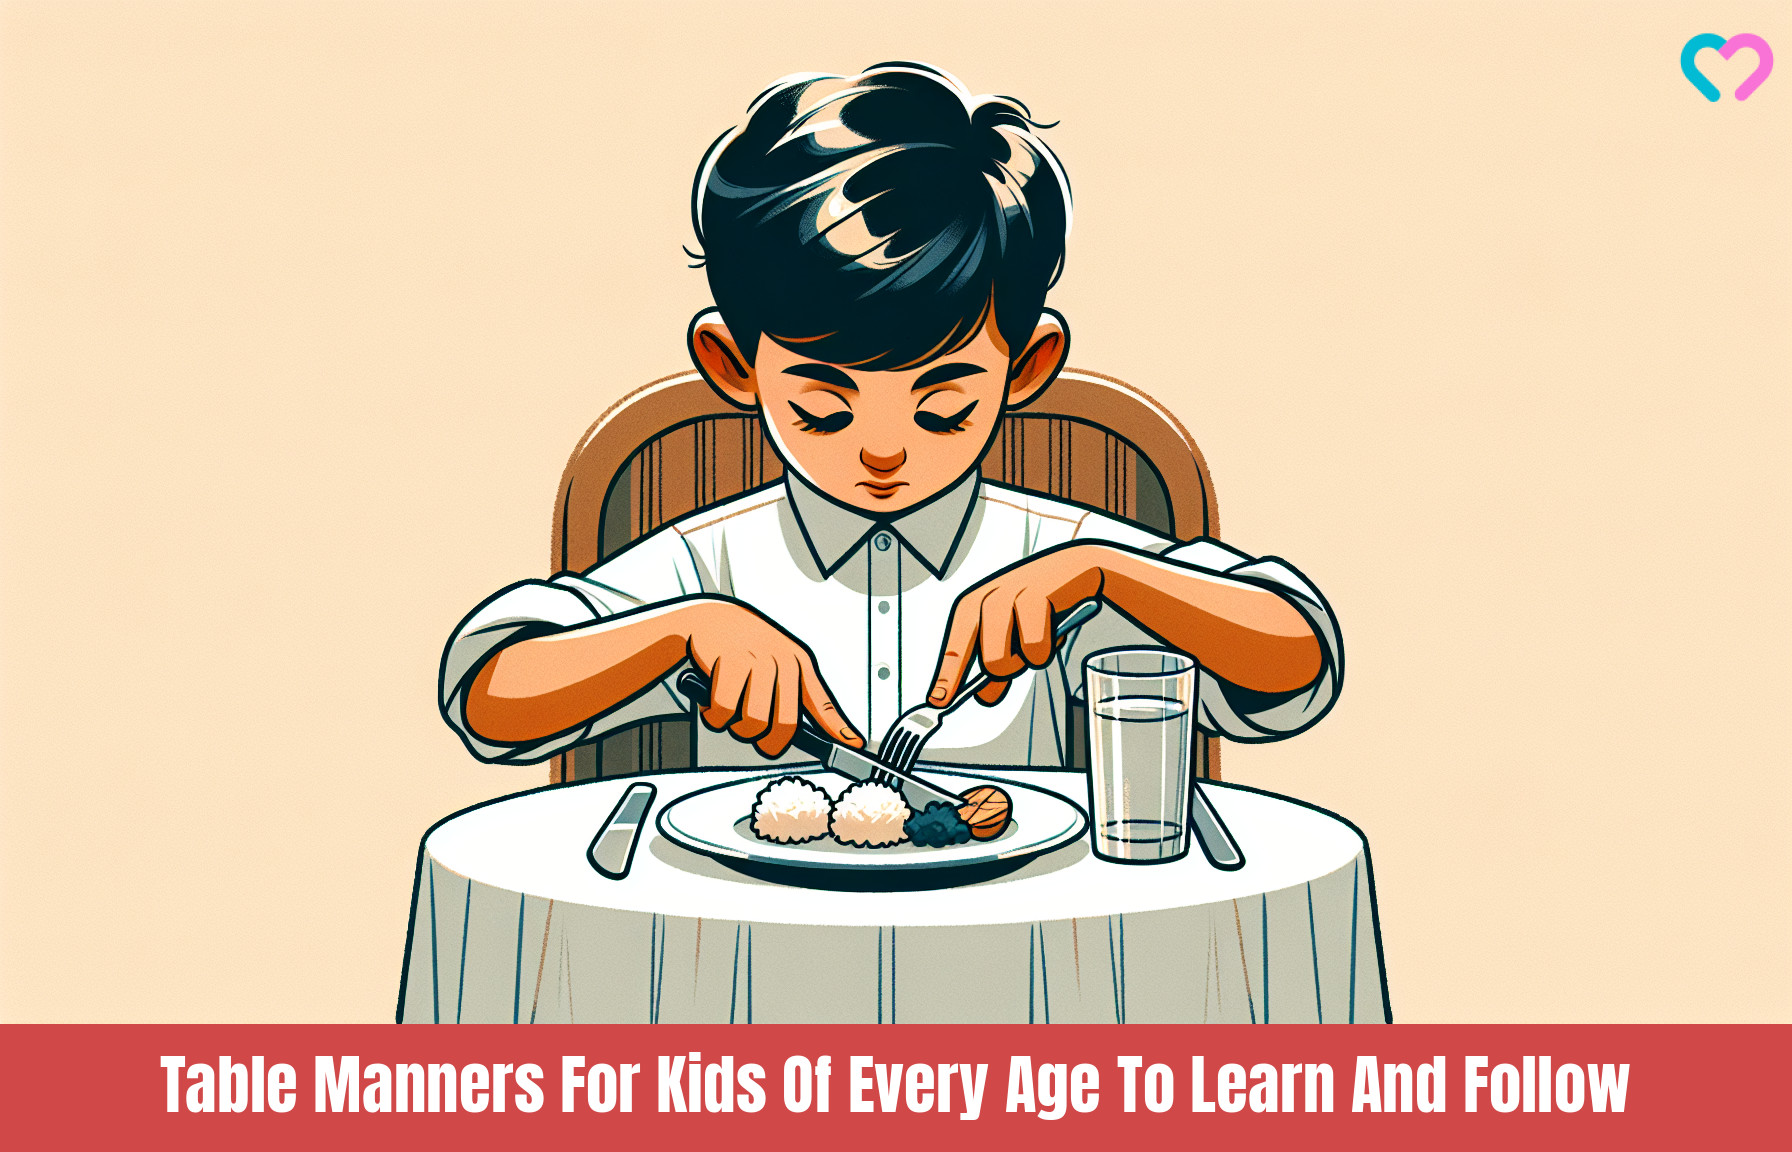 Table Manners For Kids_illustration